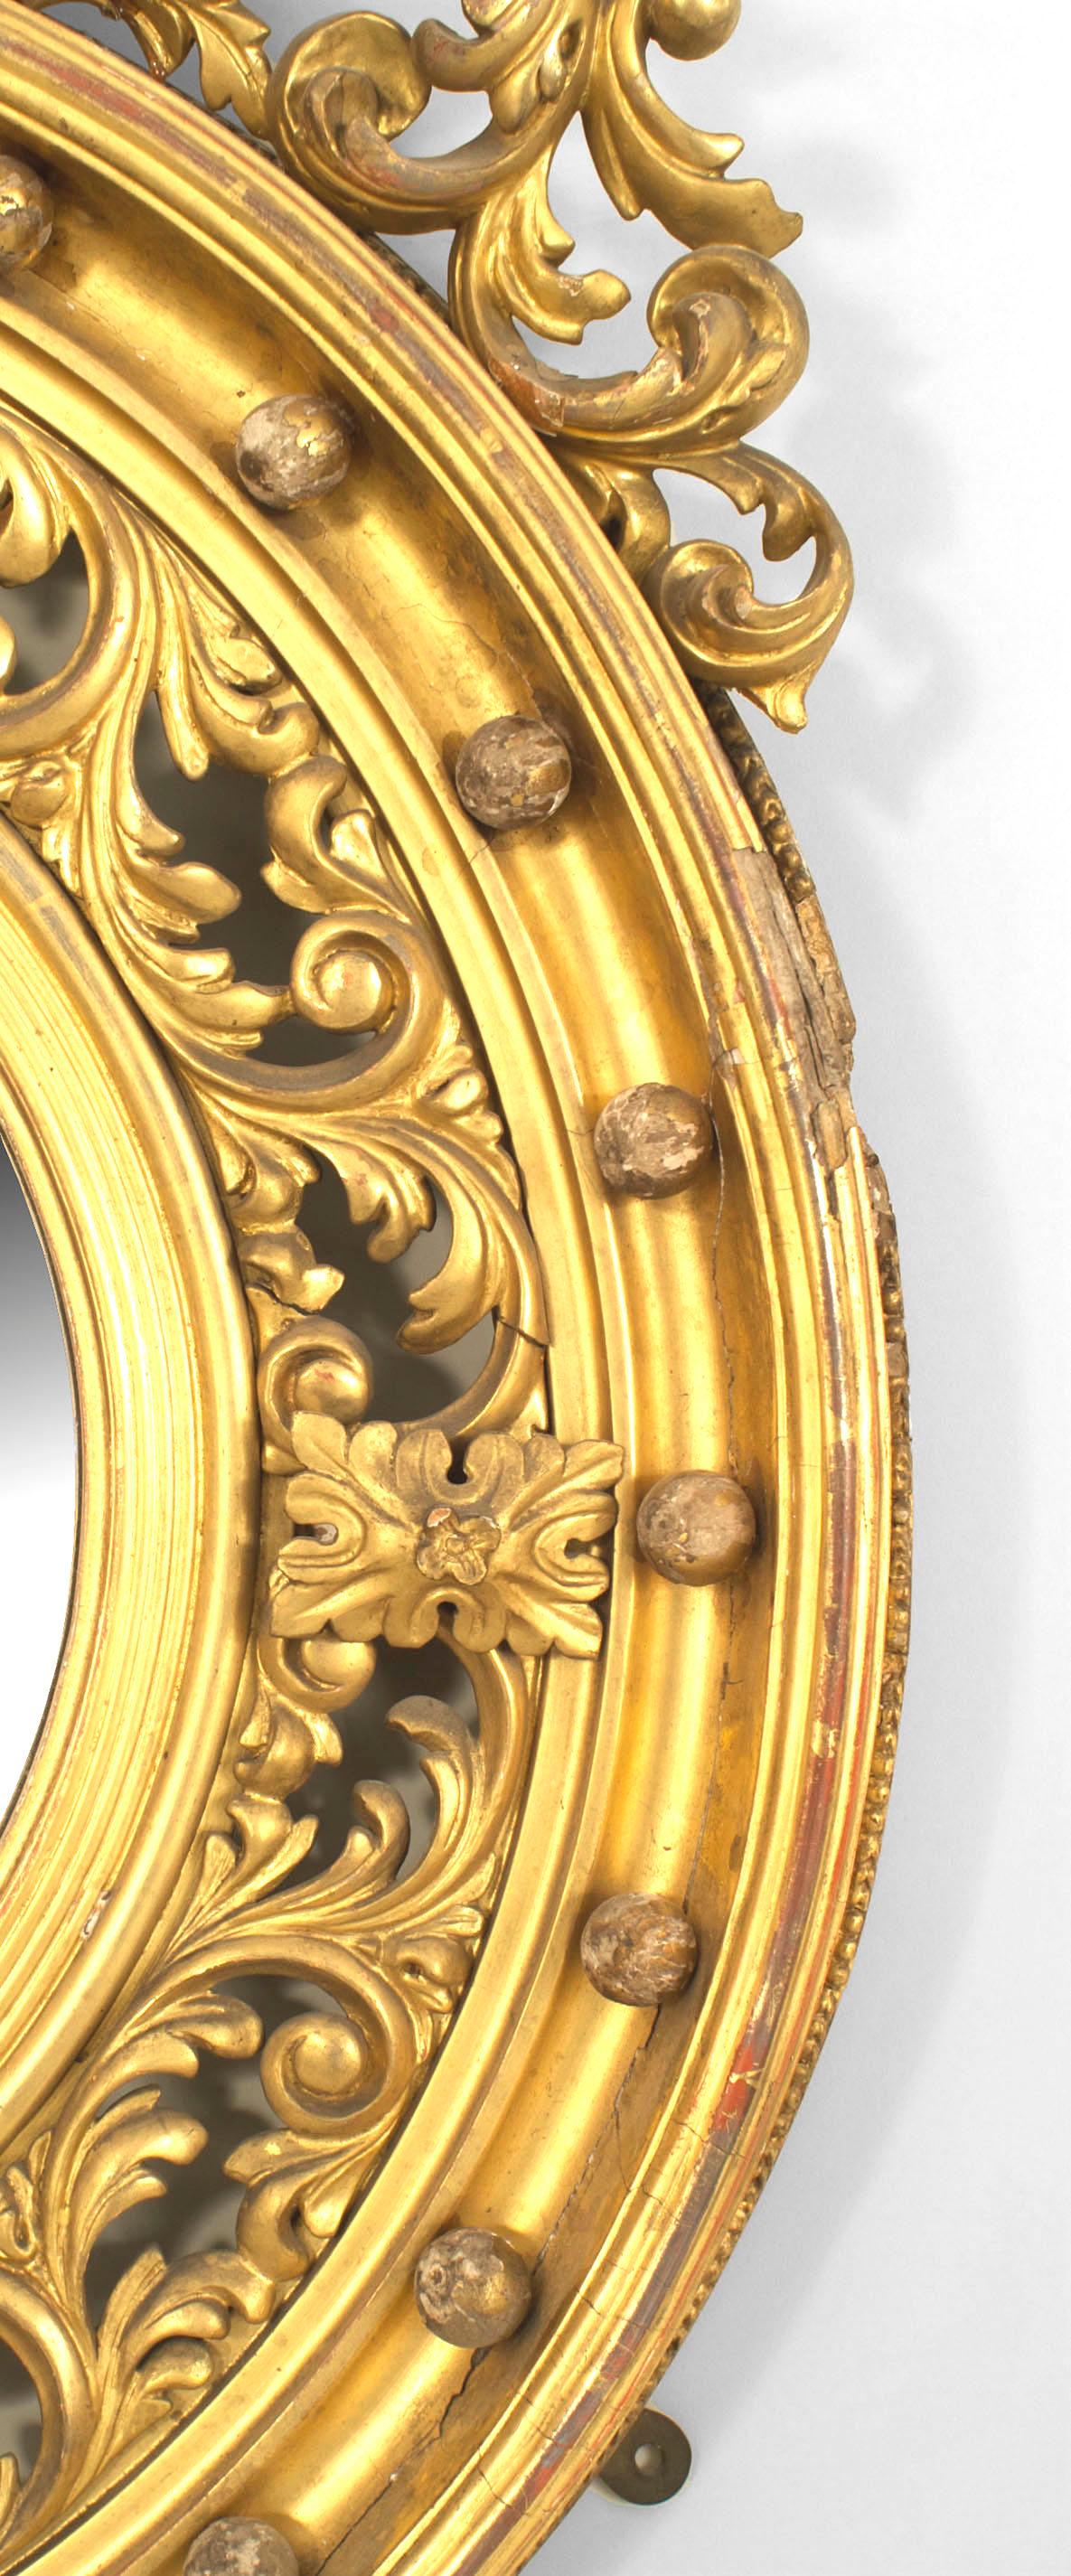 English Georgian style, 19th century gilt round convex wall mirror with filigree carved scroll design and eagle top.
 